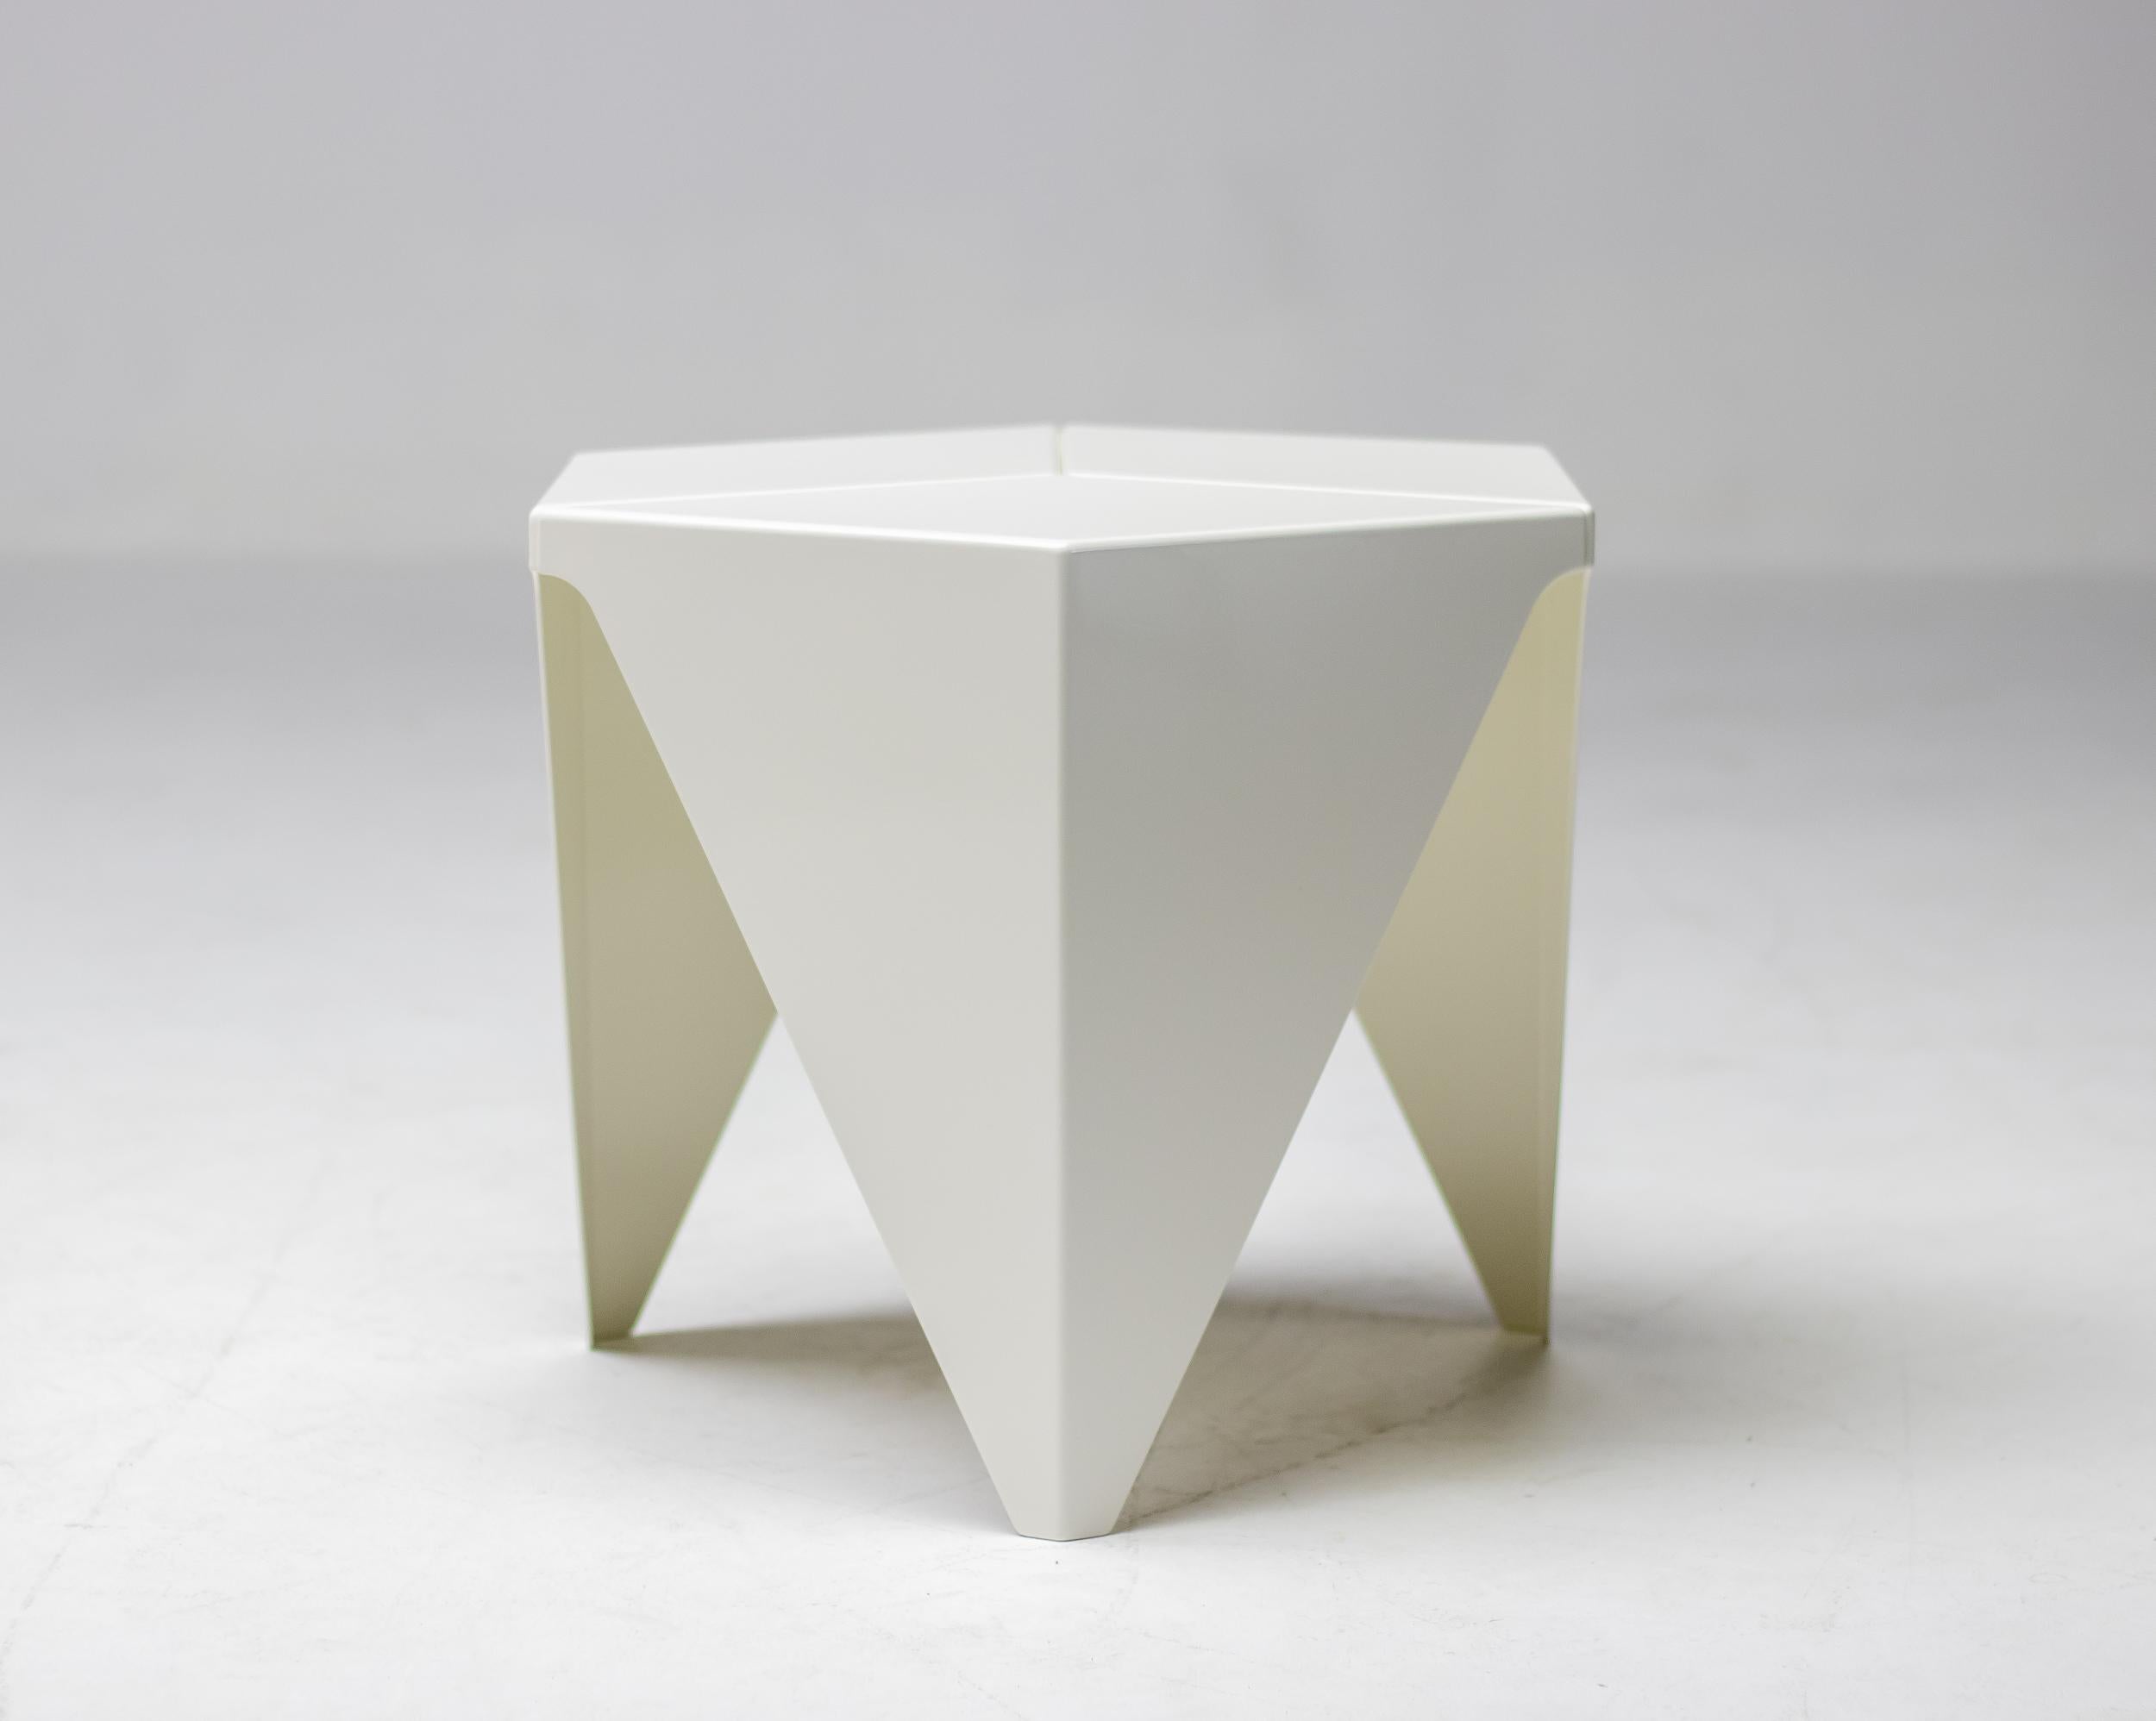 A Prismatic table in white enameled aluminum by Isamu Noguchi for Vitra. The table design was based on geometric forms and has an interesting three-legged base with a hexagonal top. Made of folded sheet aluminium inspired by Japanese paper folding